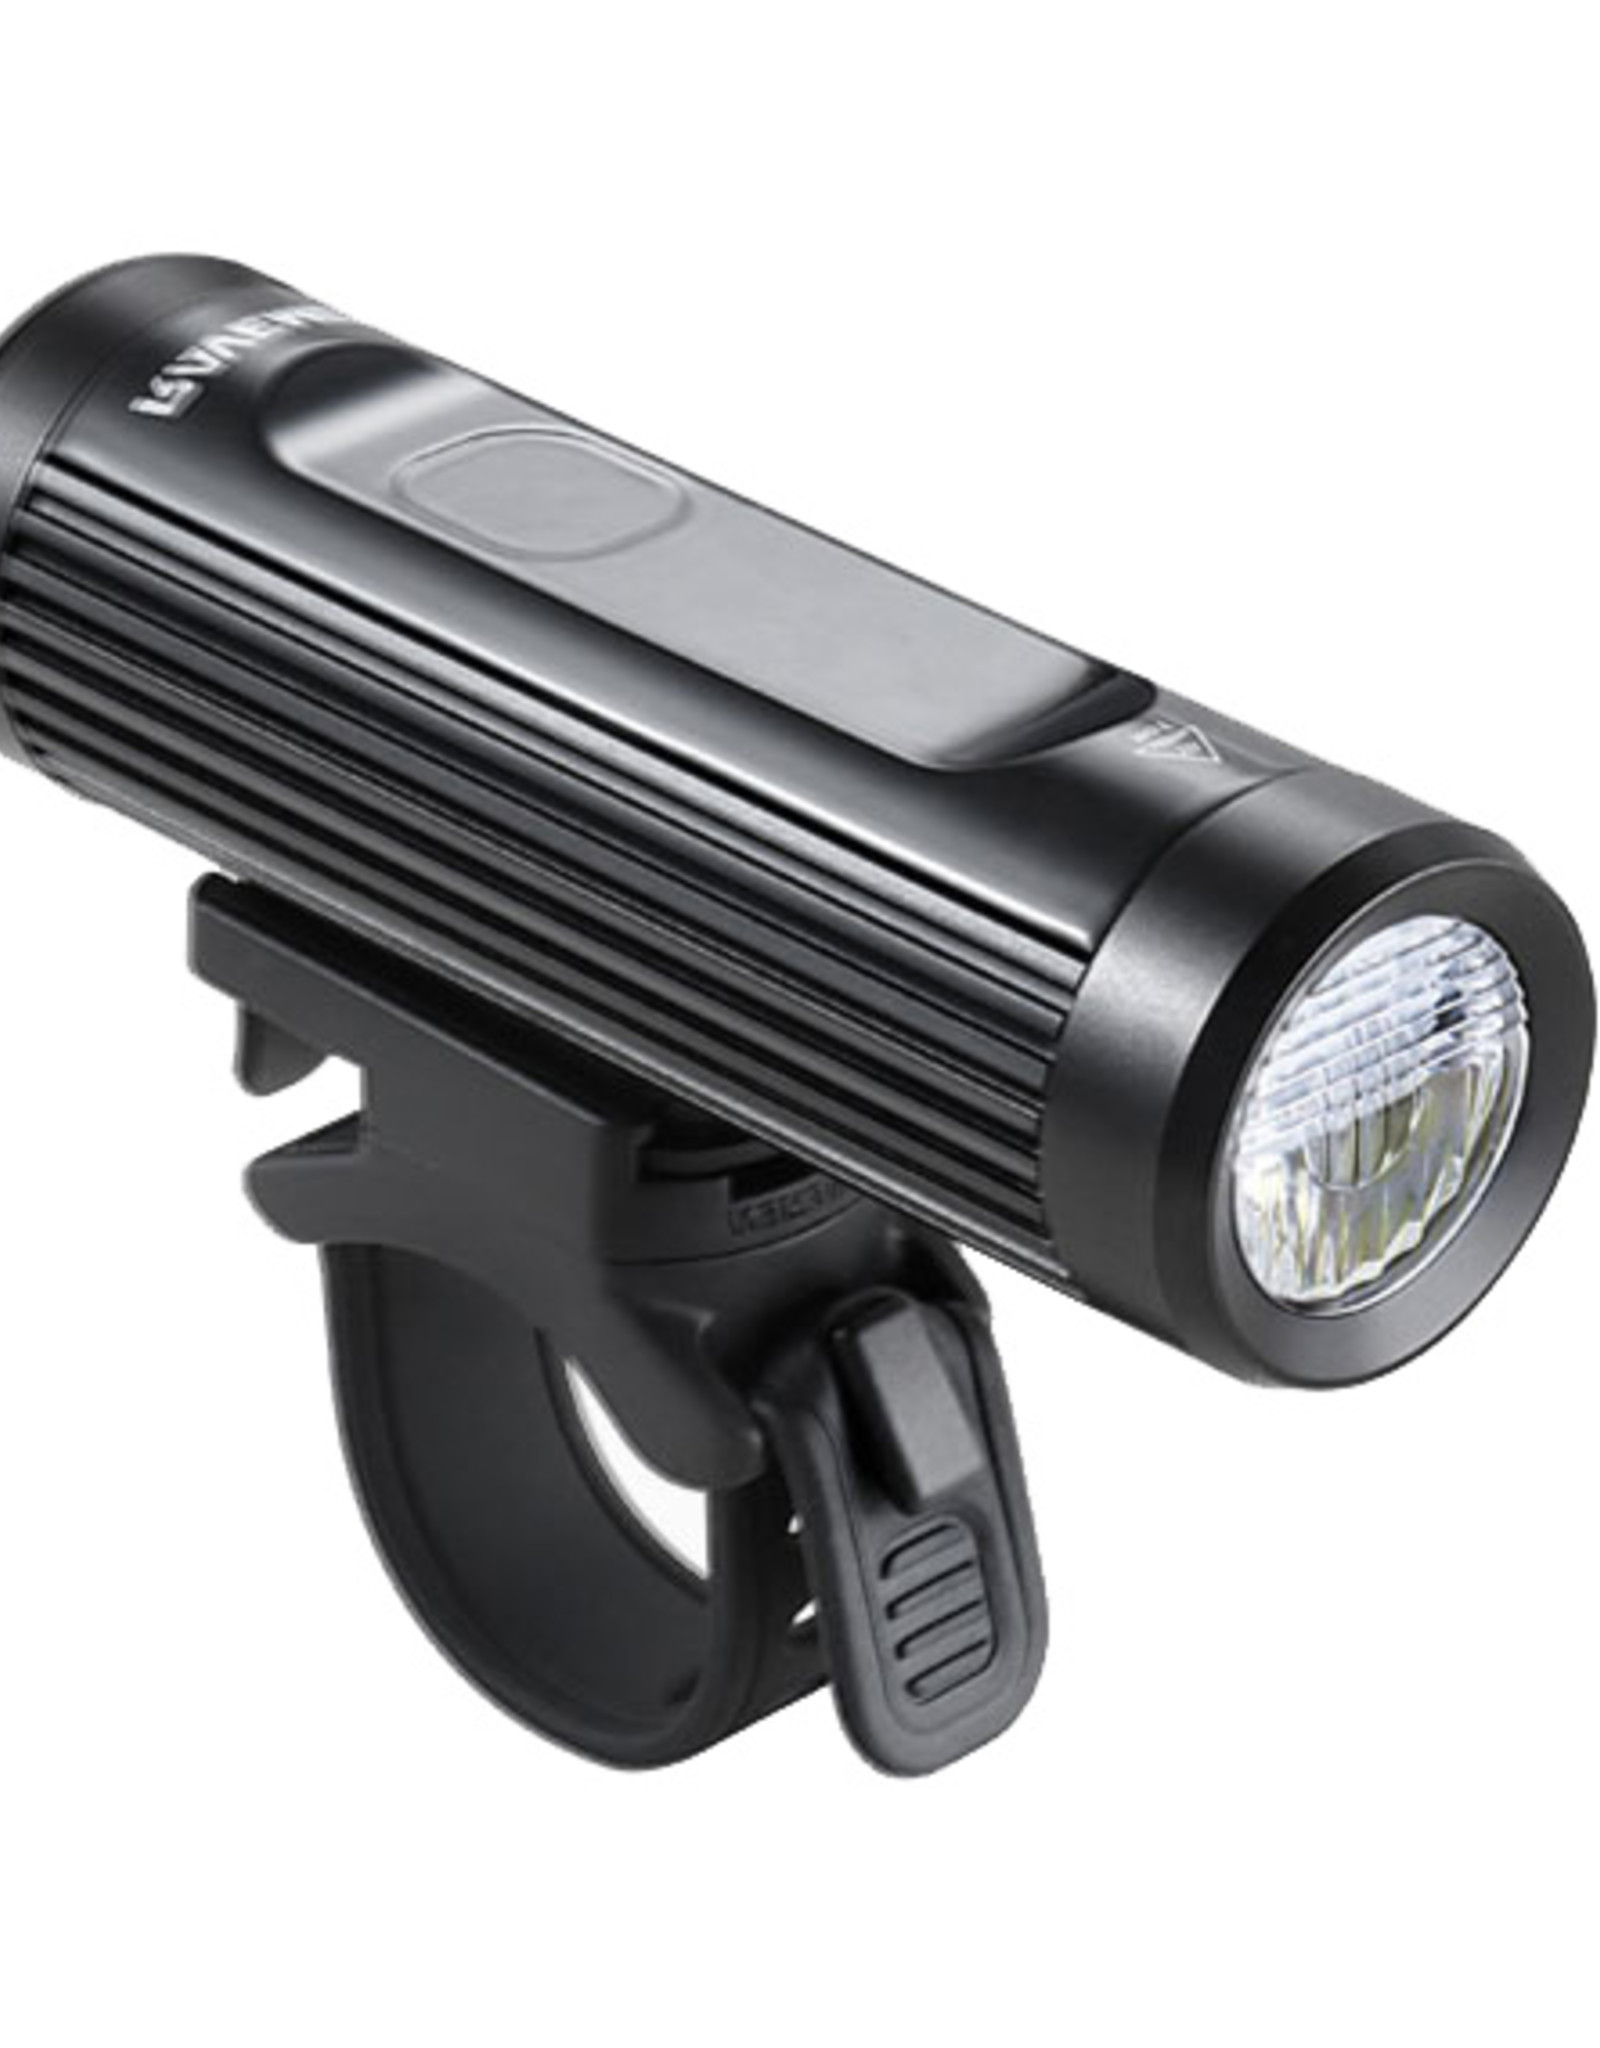 Ravemen CR900 Touch USB Rechargeable DuaLens Front Light with Remote in Matt/Gloss Black (900 Lumens)